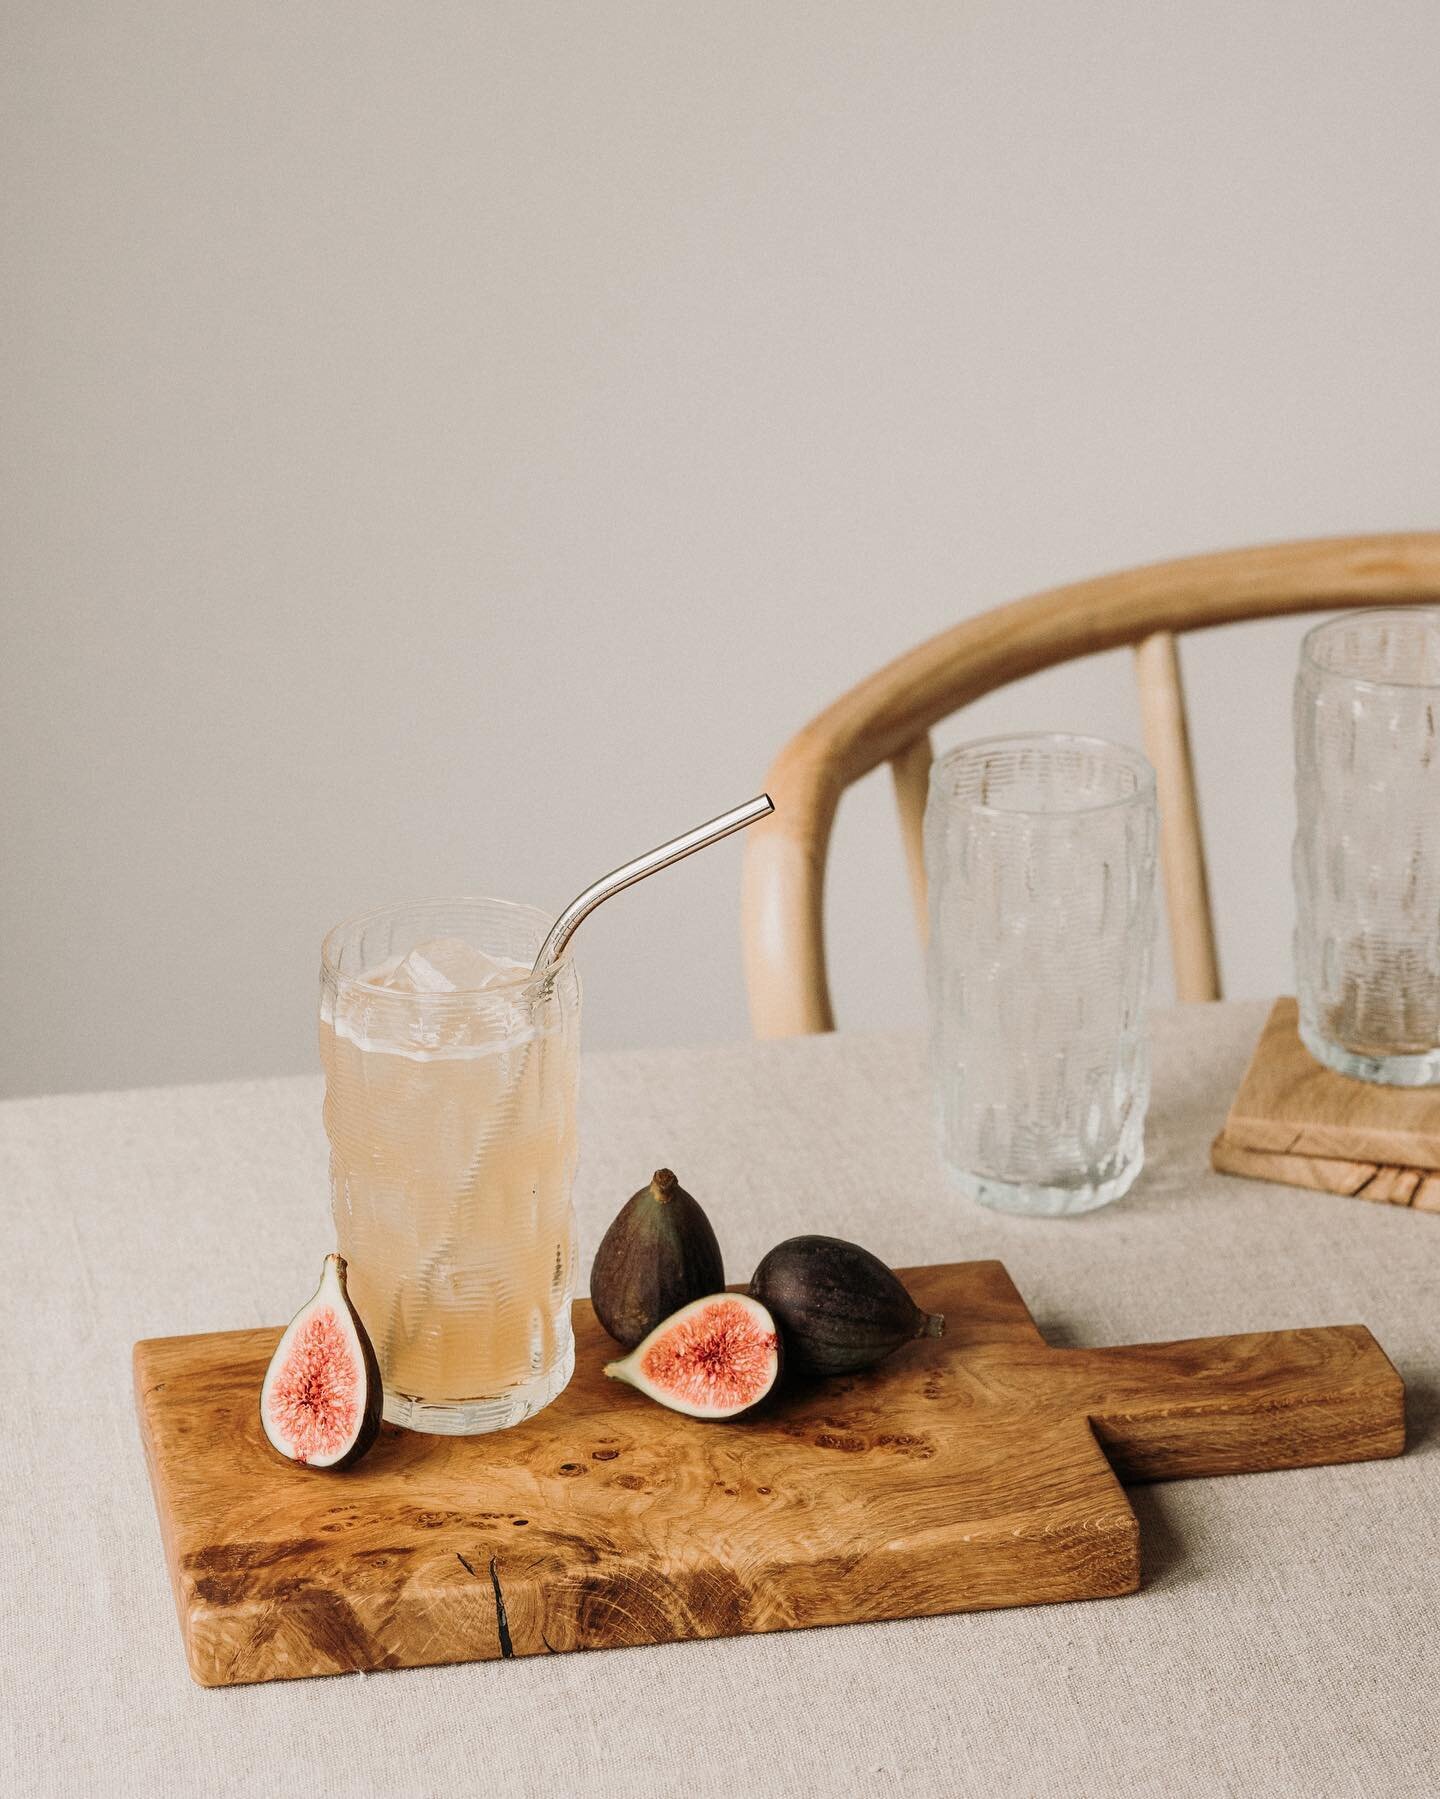 Summer mood&hellip;☀️ Hands up who&rsquo;s reaching for the ice cold beverages today 🙋🏼&zwj;♀️ 

What would be your drink of choice in the sun?! Ours are:
🦊 Pina colada 
🐵 Rose wine 
 
Now you go! ⬇️

📷 @mykindlifestyle 

#servingboard #servingb